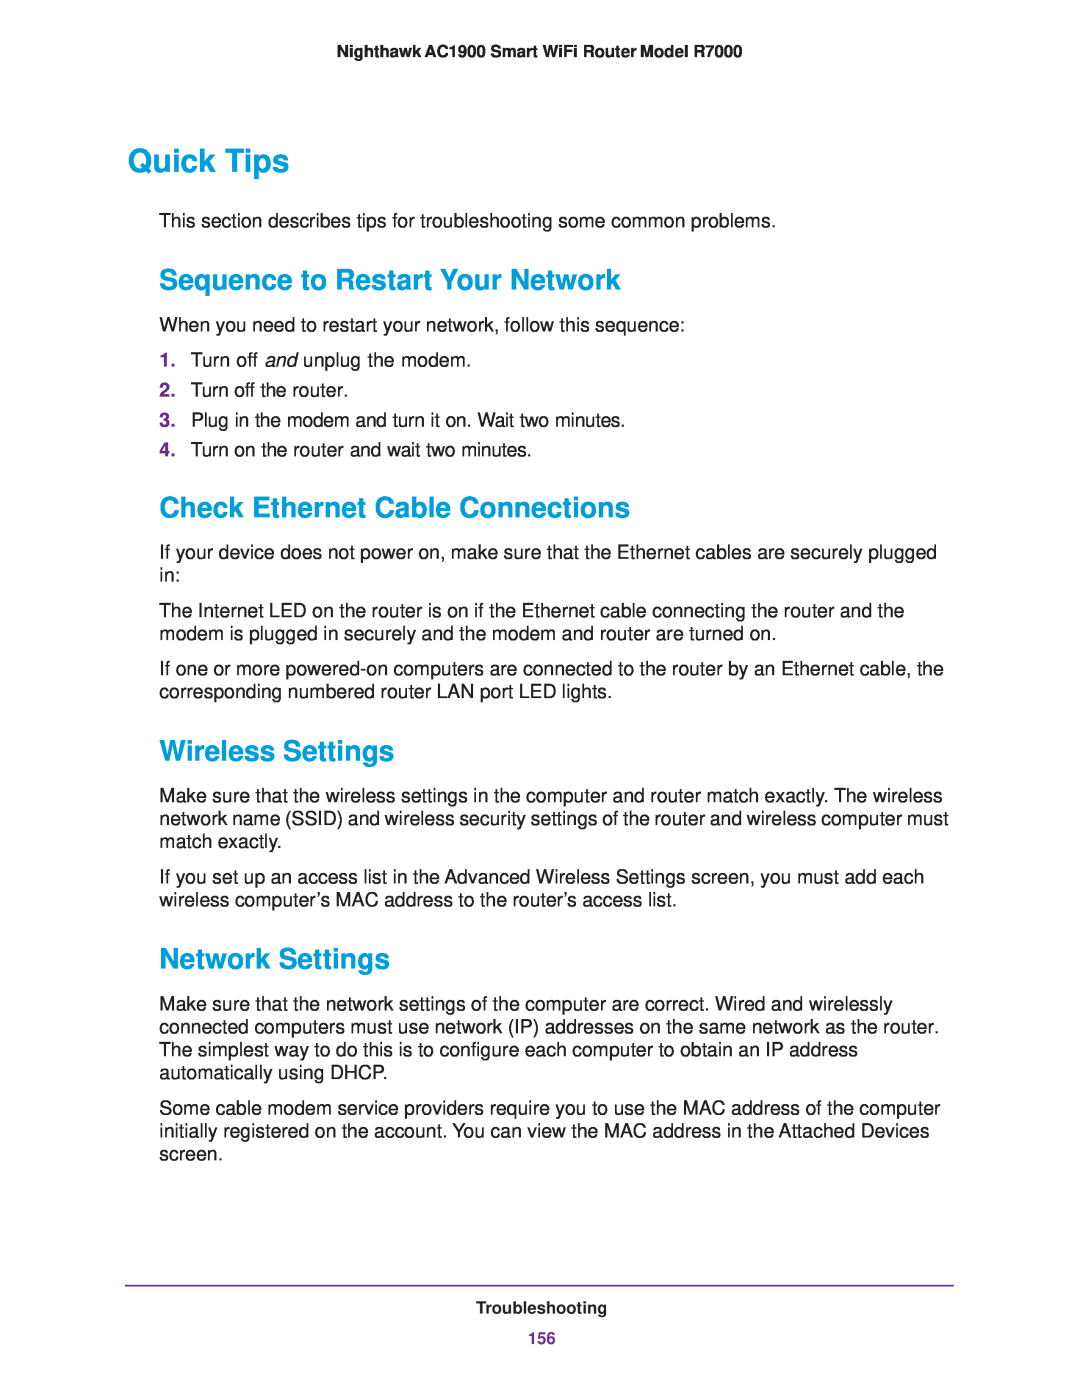 NETGEAR R7000 user manual Quick Tips, Sequence to Restart Your Network, Check Ethernet Cable Connections, Wireless Settings 